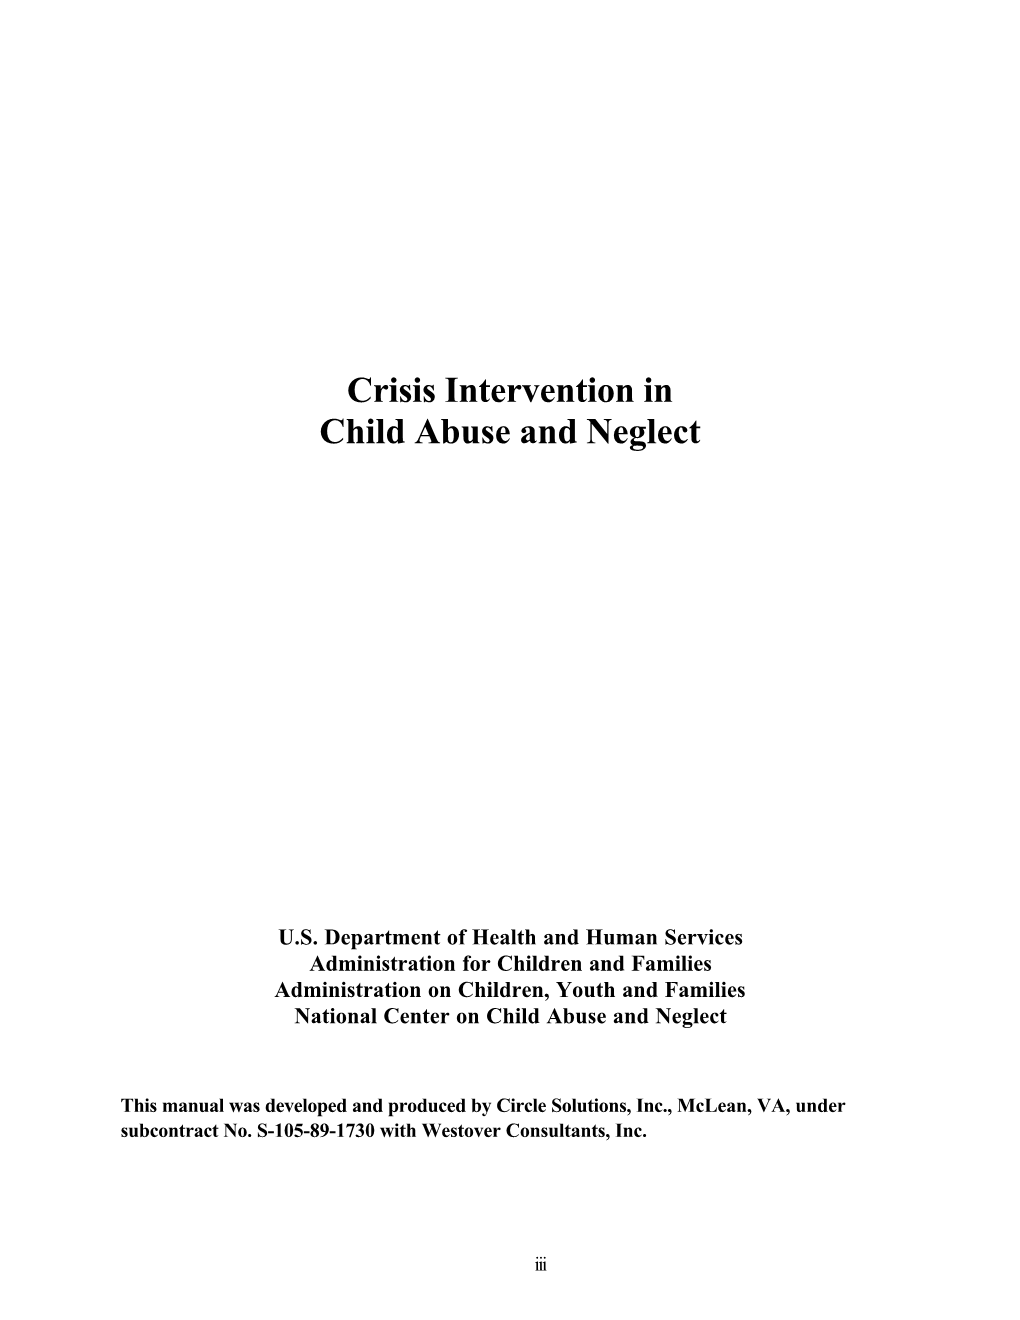 Crisis Intervention in Child Abuse and Neglect